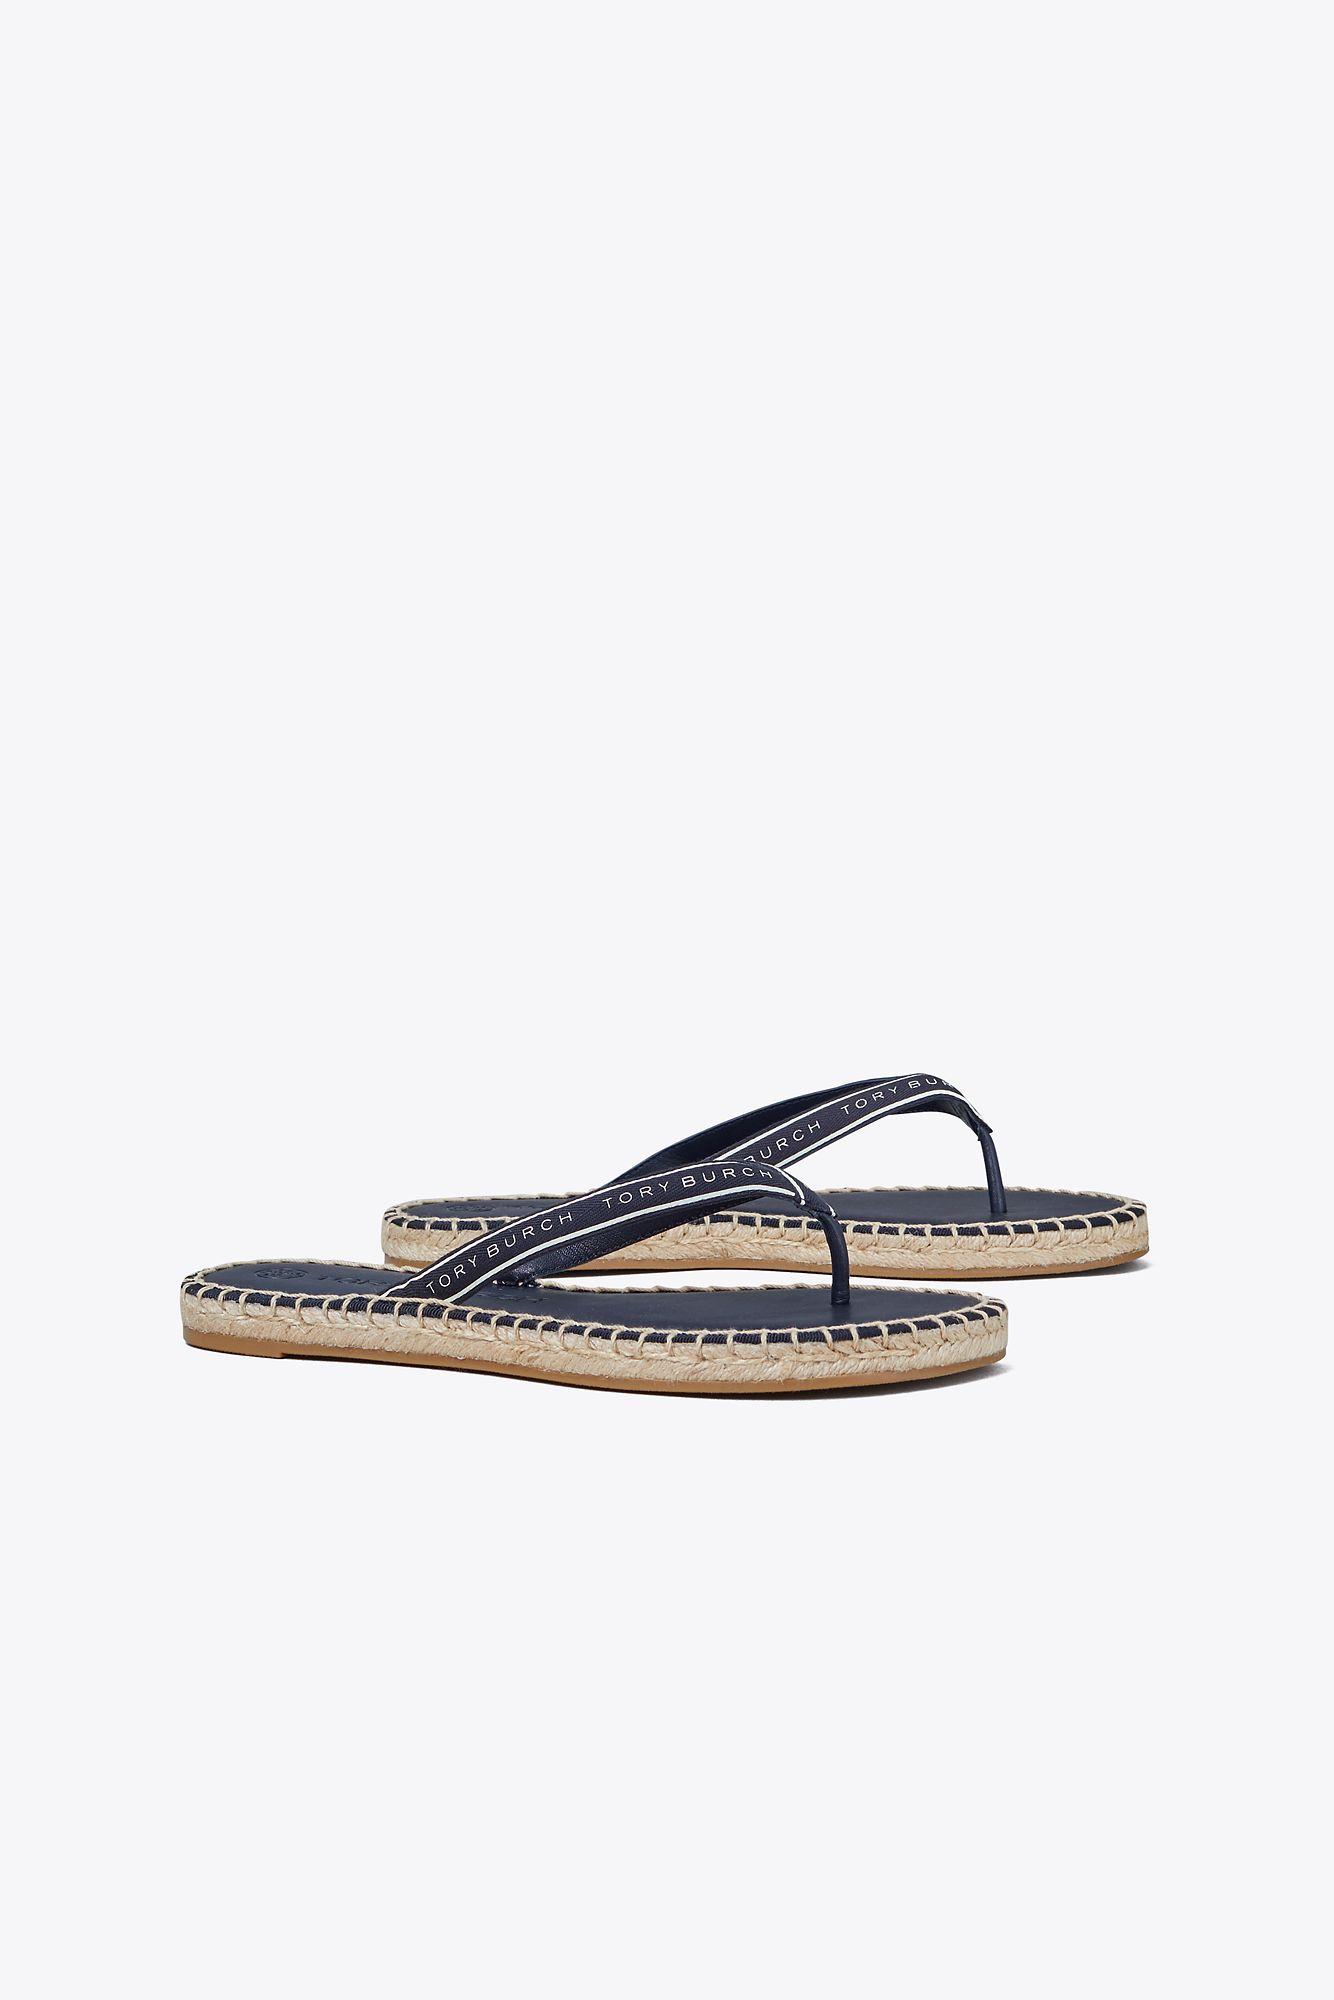 Tory Burch Tory Ribbon Thong Espadrille in White | Lyst